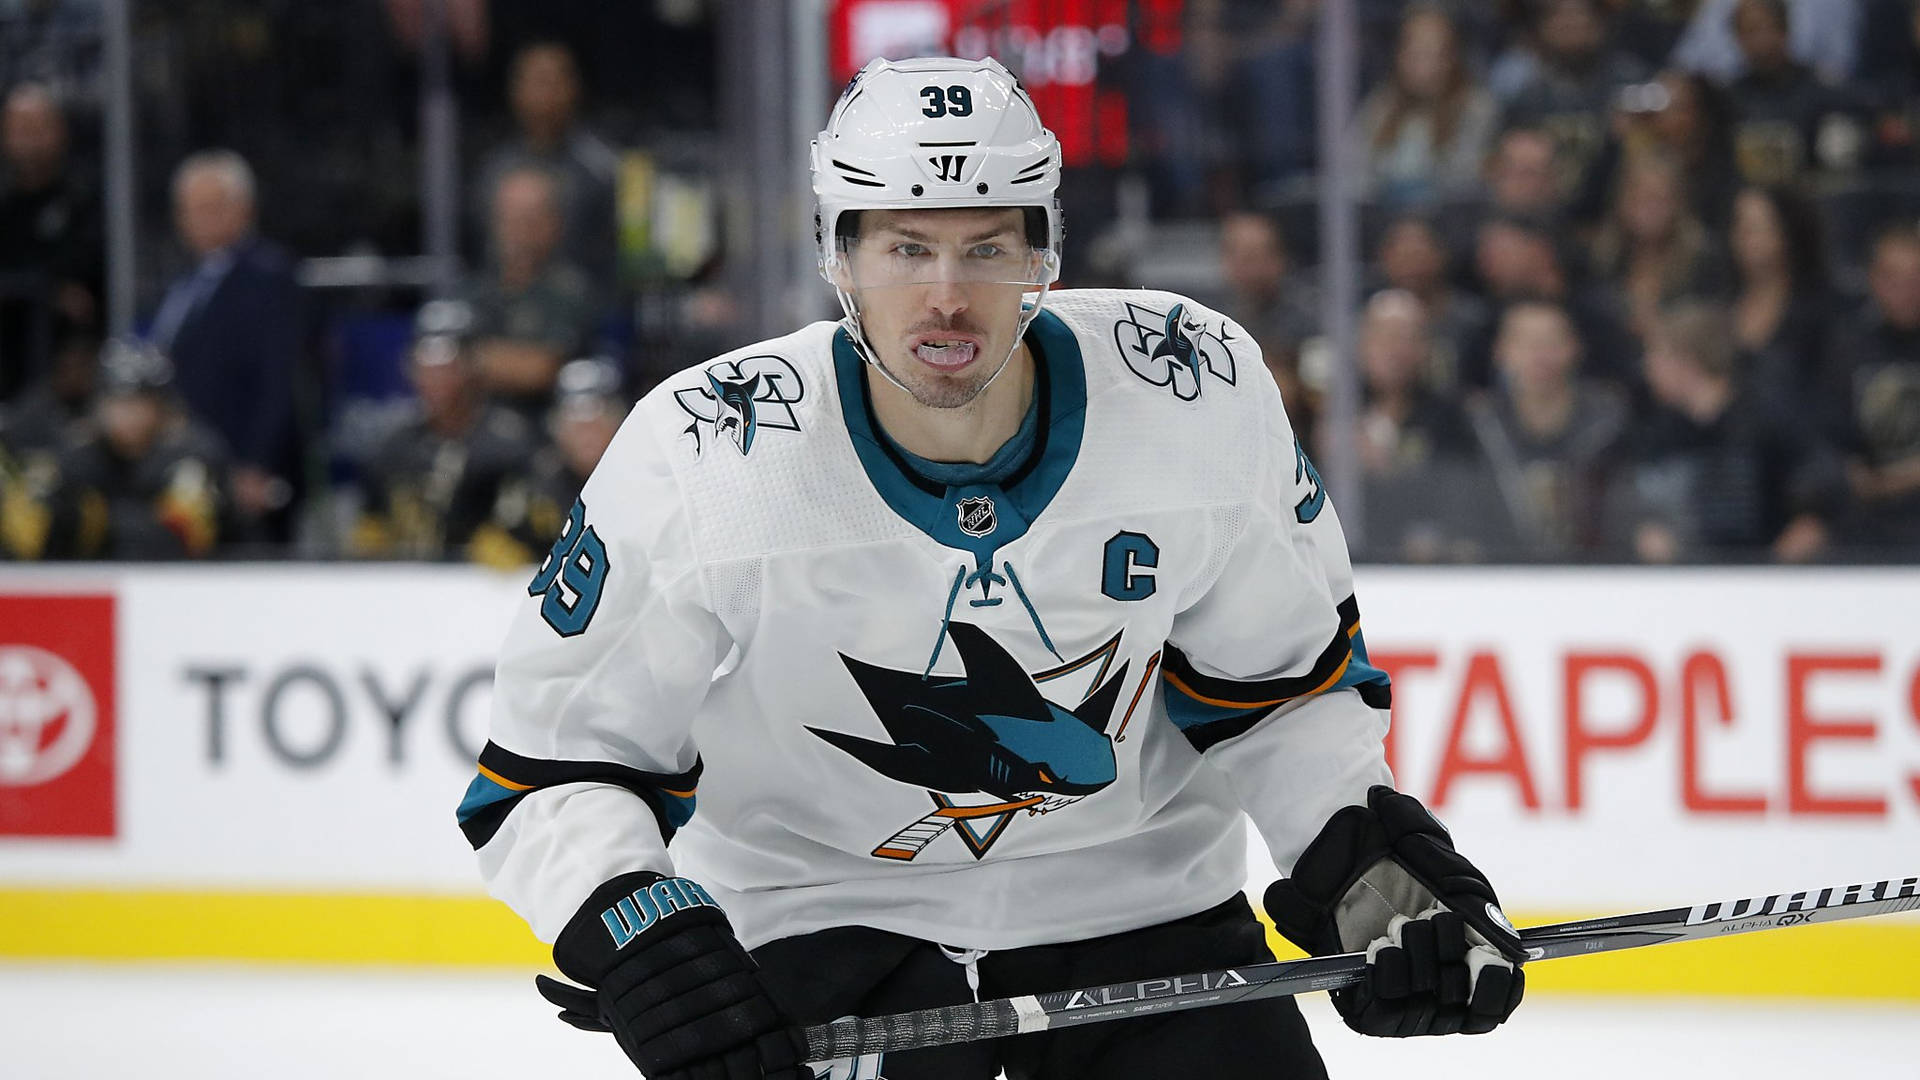 Canadian Professional Ice Hockey Player Logan Couture Background